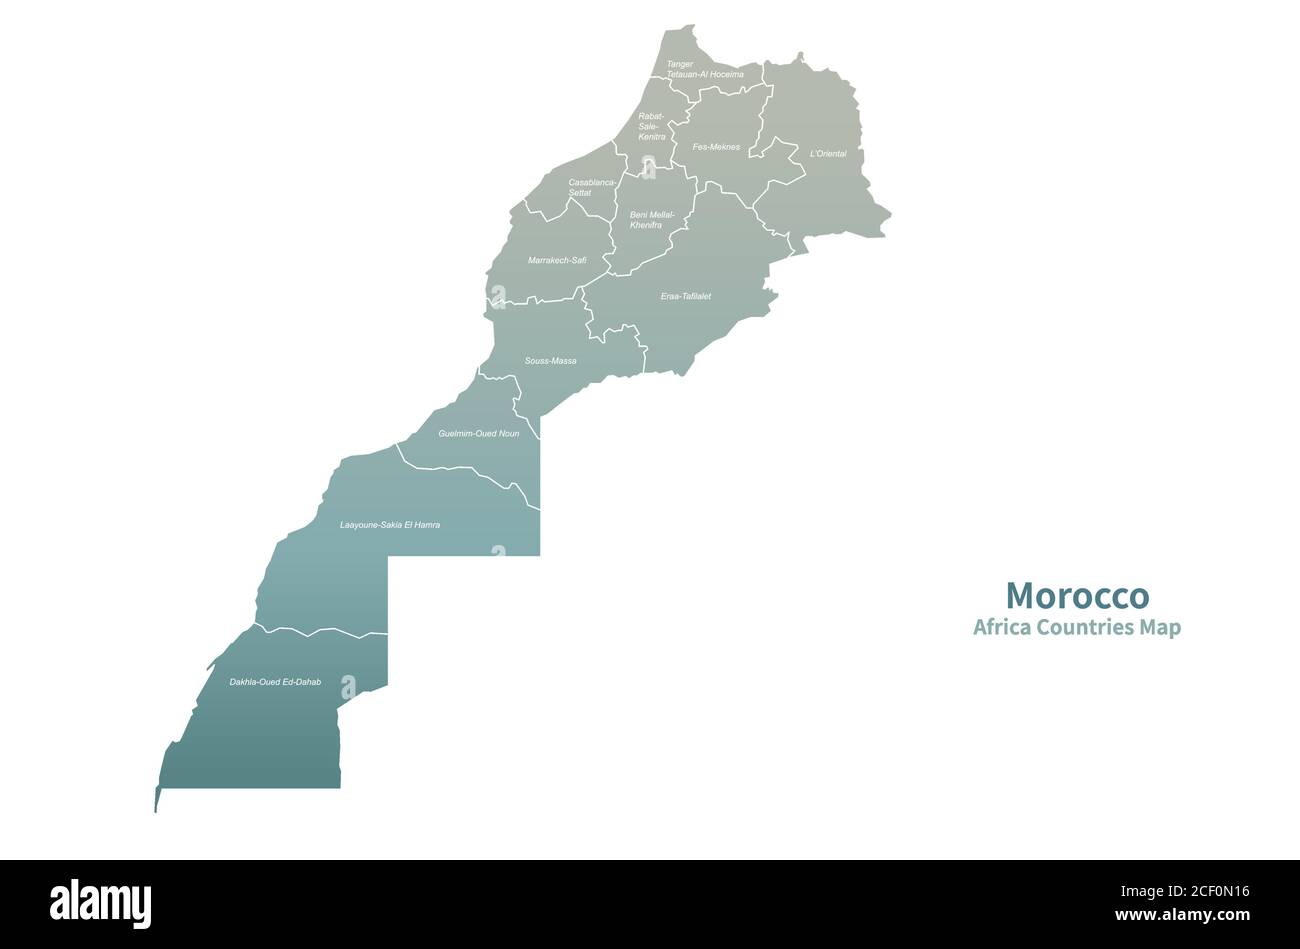 Morocco Vector map. African Countries map. Stock Vector